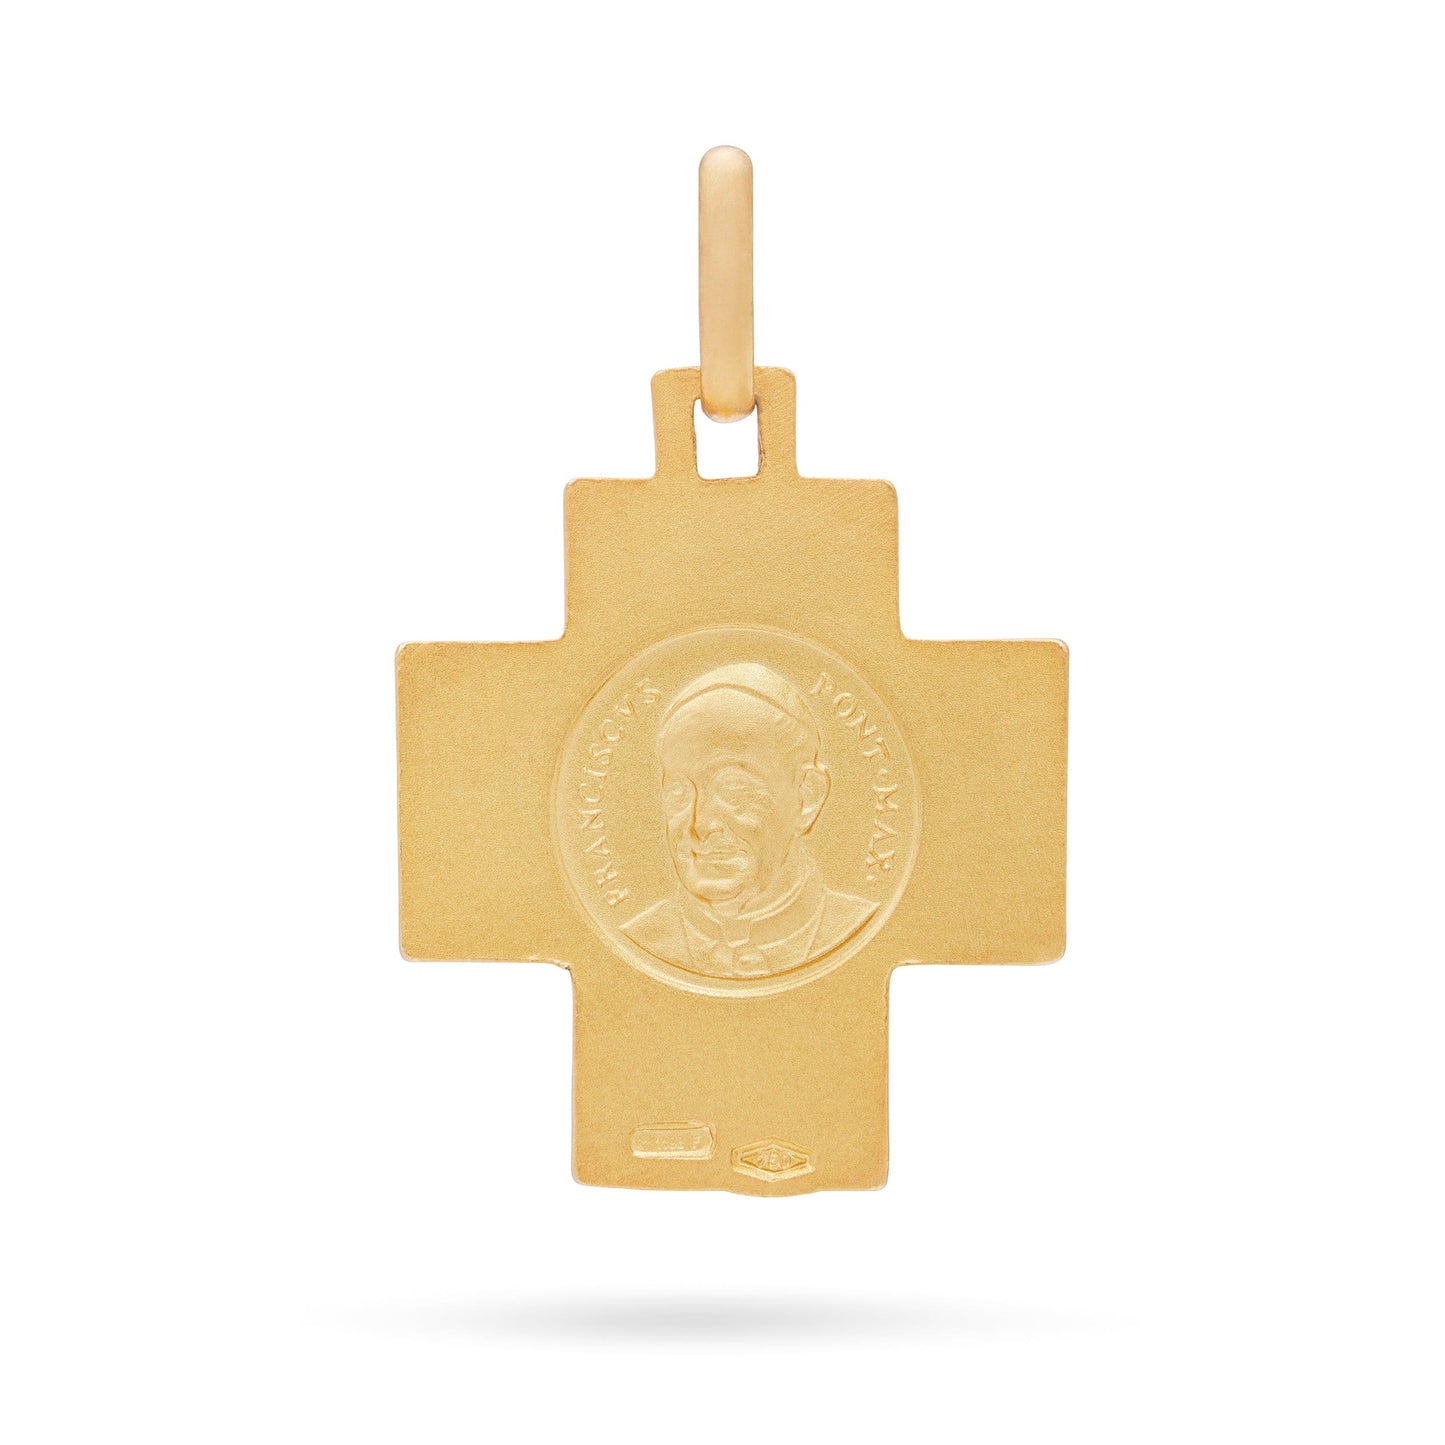 MONDO CATTOLICO Jewelry 15 mm (0.59 in) Yellow Gold Squared Pendant With Peace Cross and Pope Francis face